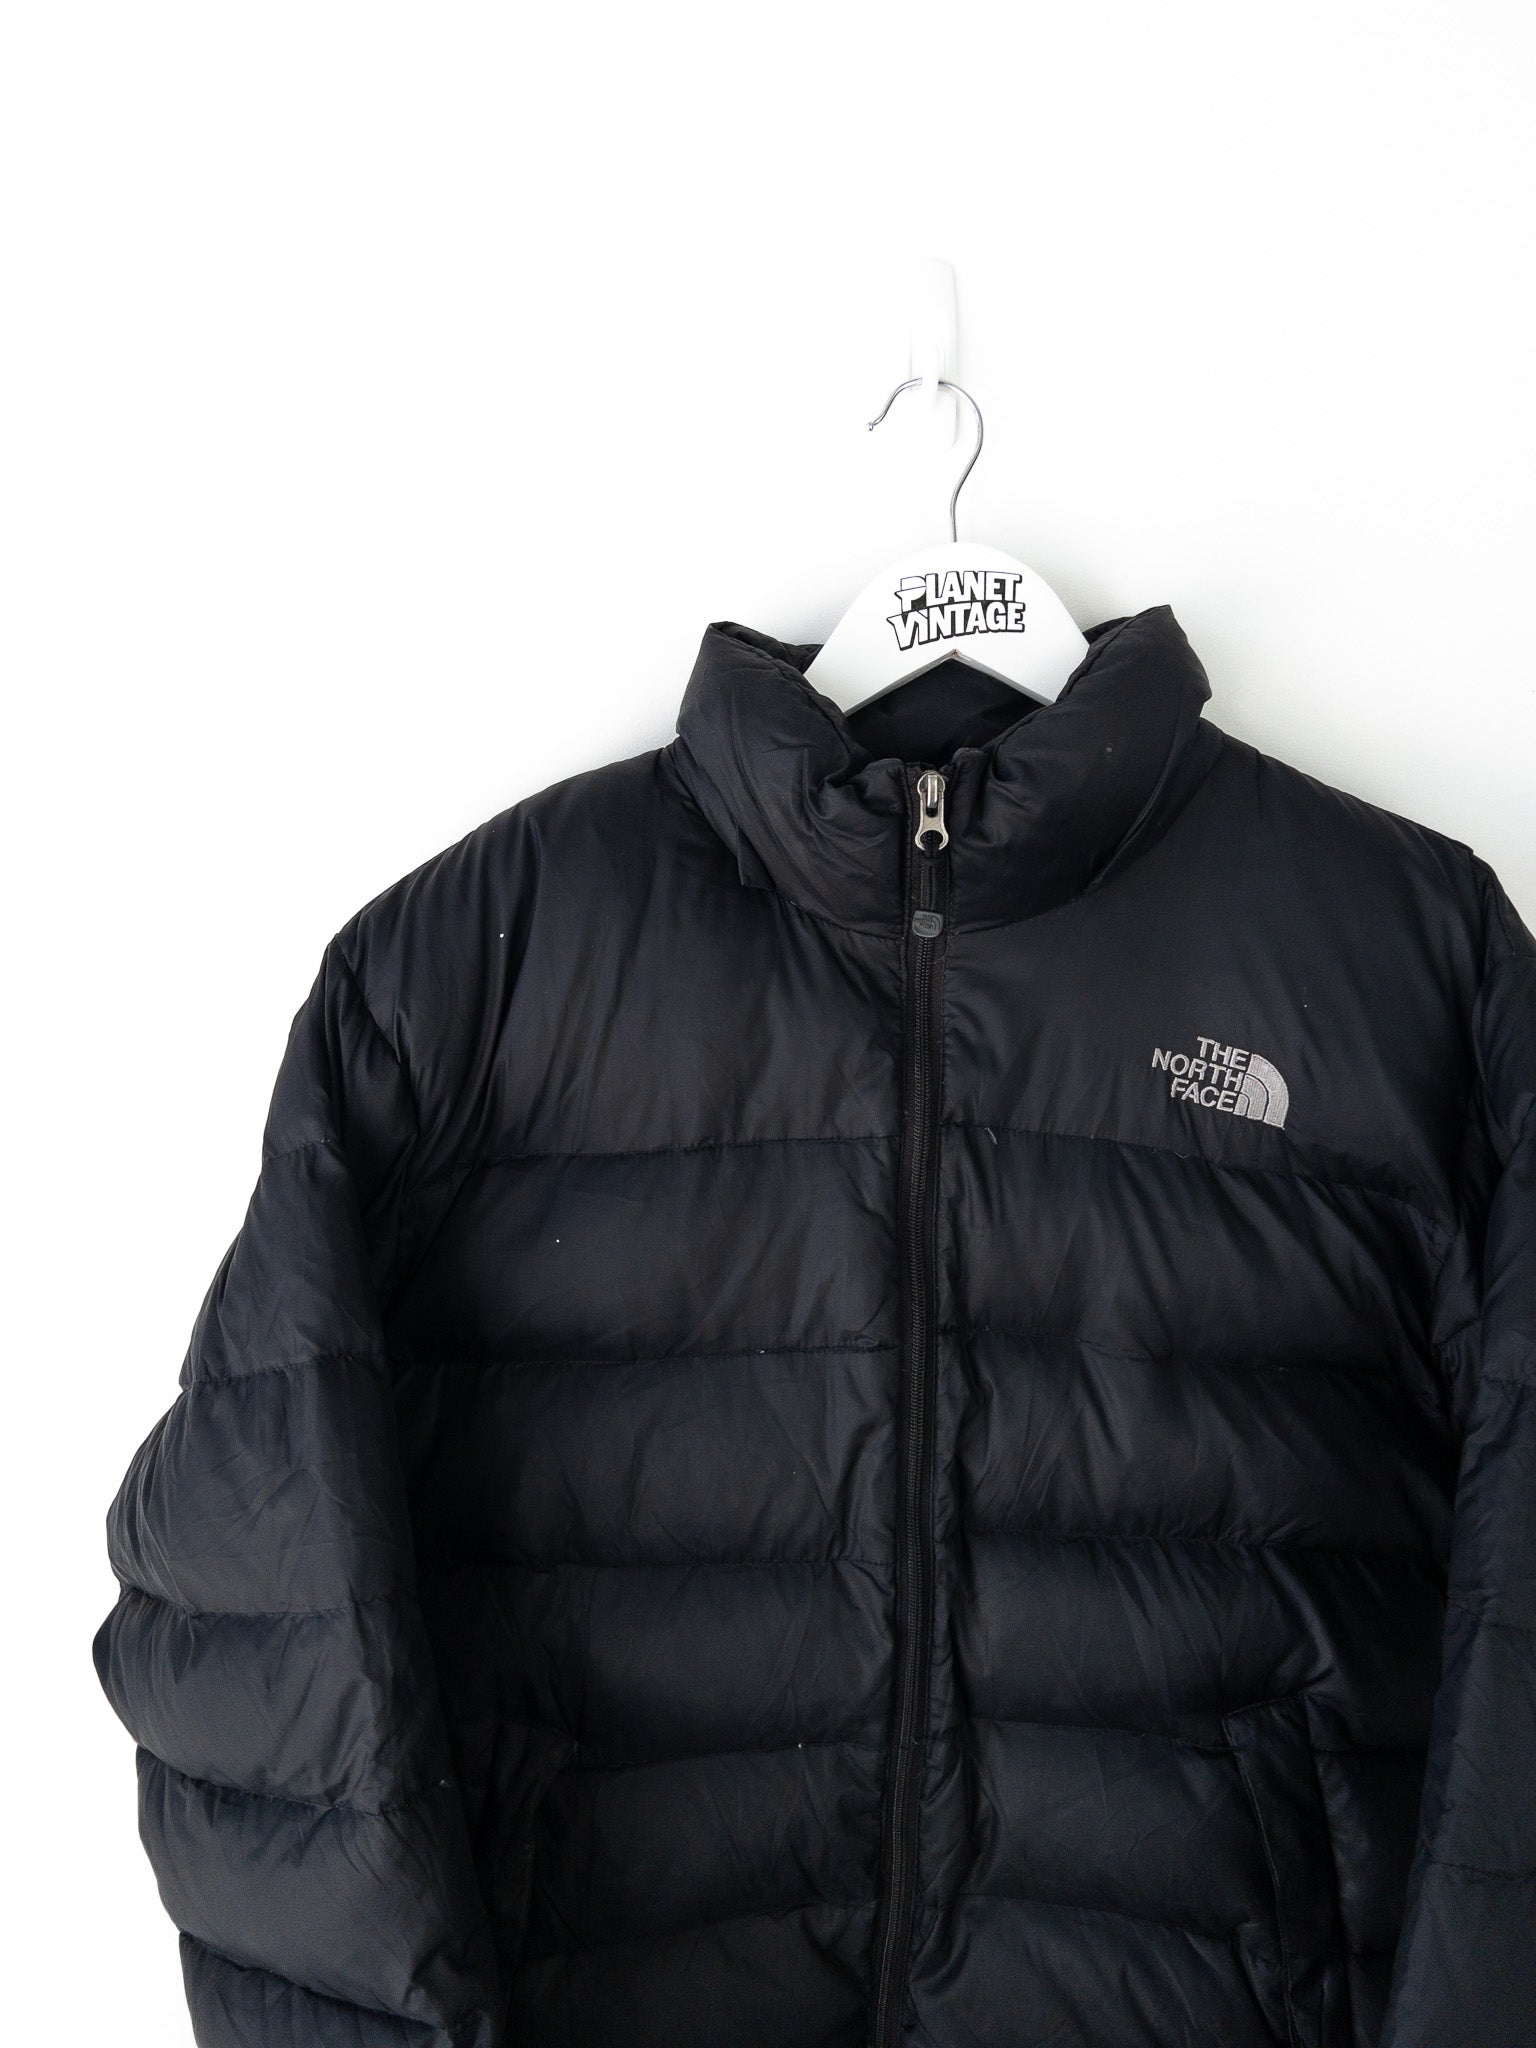 Vintage The North Face 700 Puffer Jacket (M)